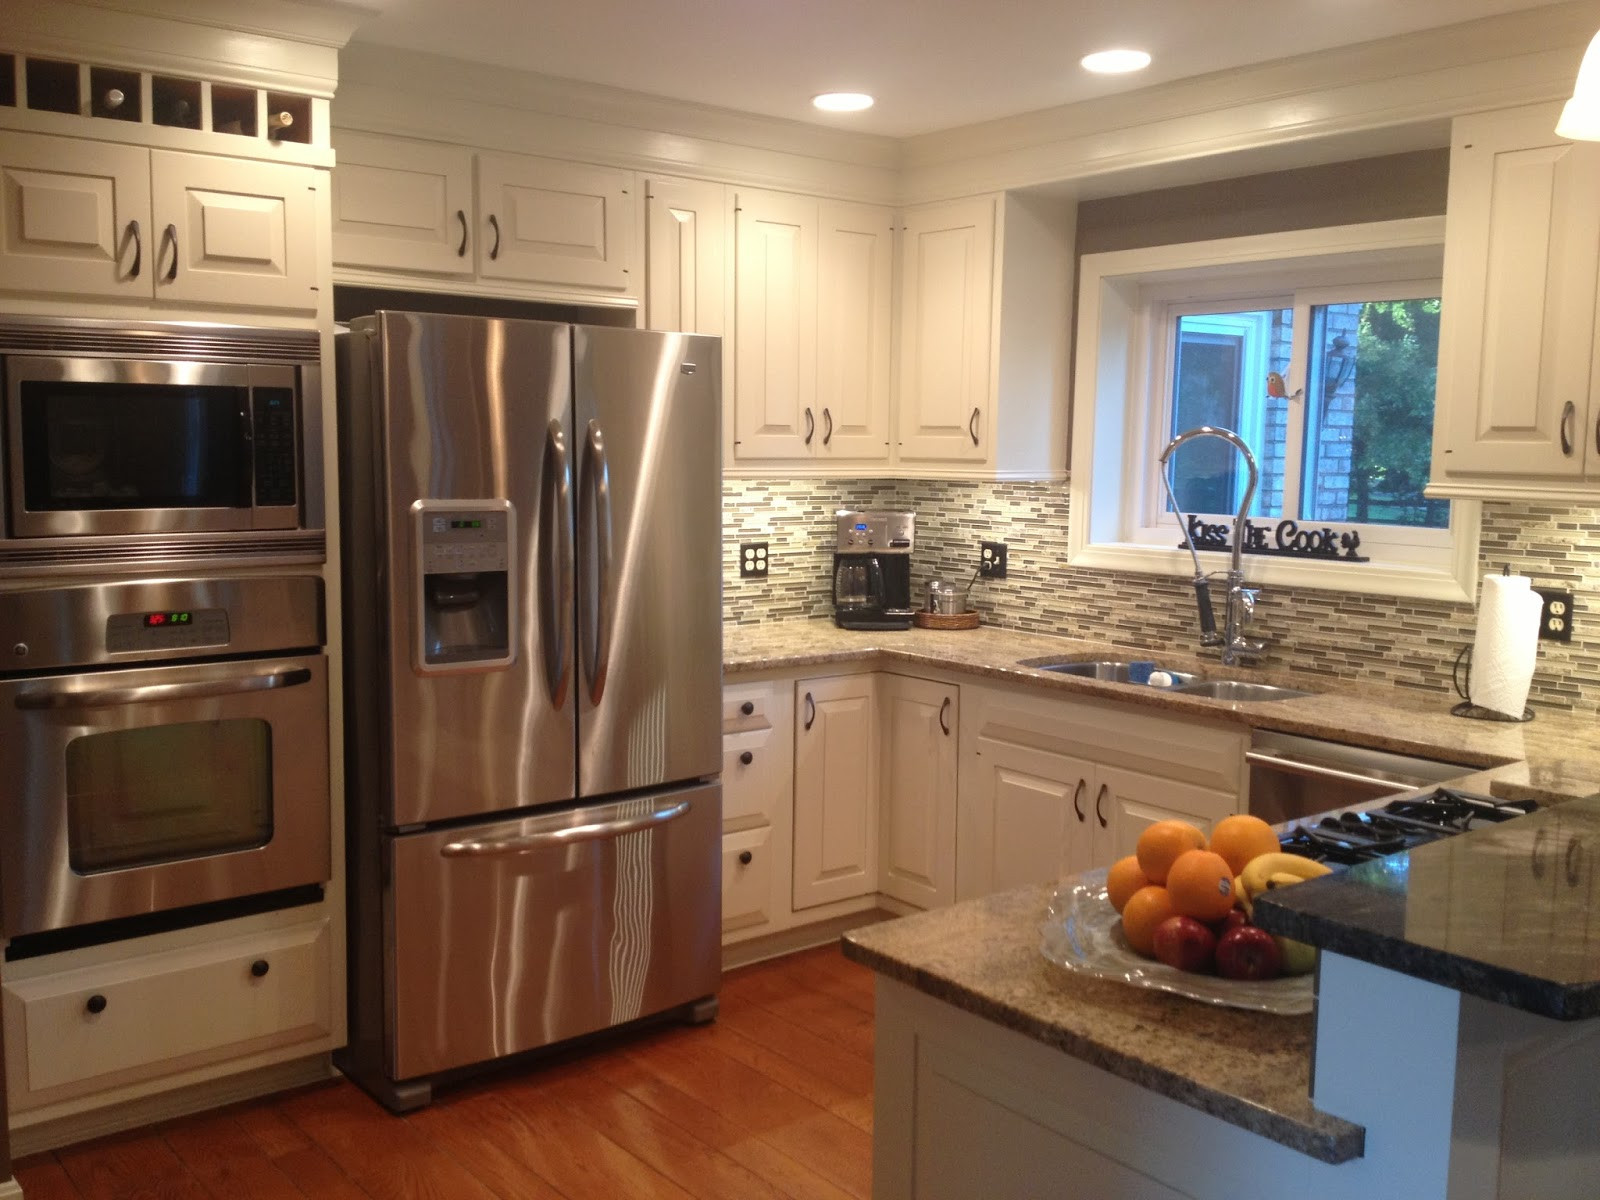 Kitchen Remodels On A Budget Fresh Four Seasons Style the New Kitchen Remodel On A Bud